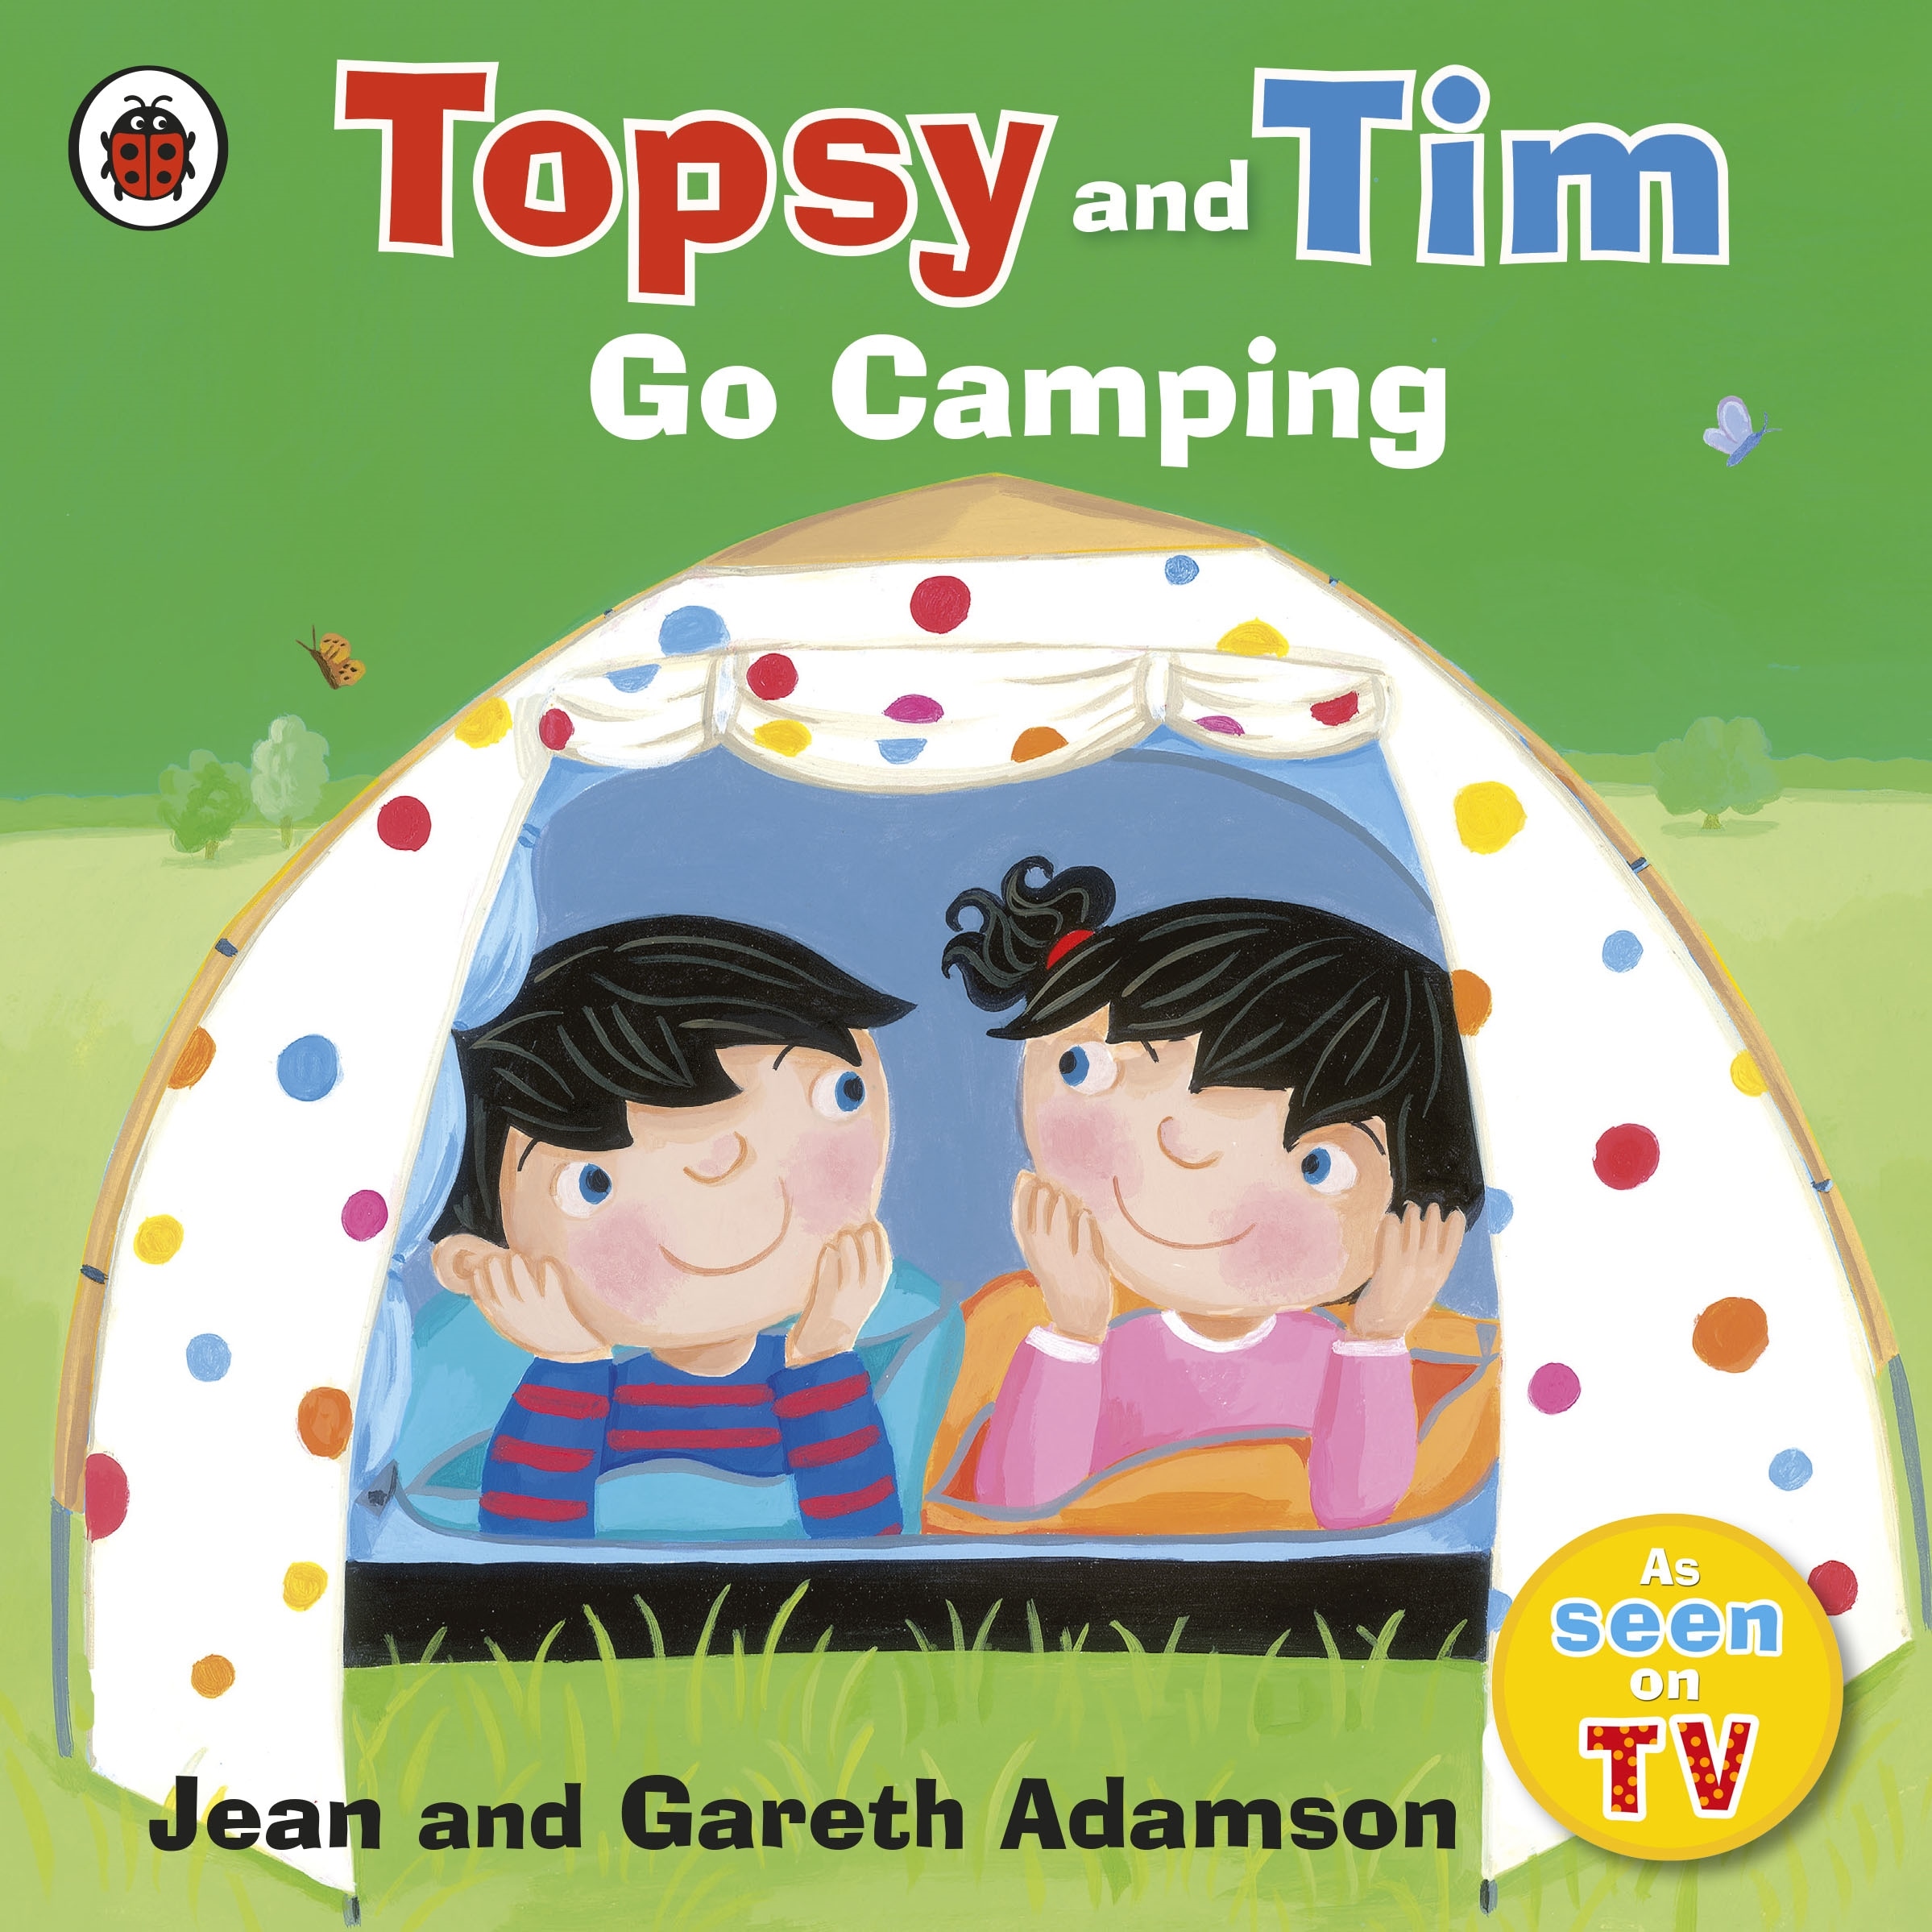 Book “Topsy and Tim: Go Camping” by Jean Adamson — June 3, 2010